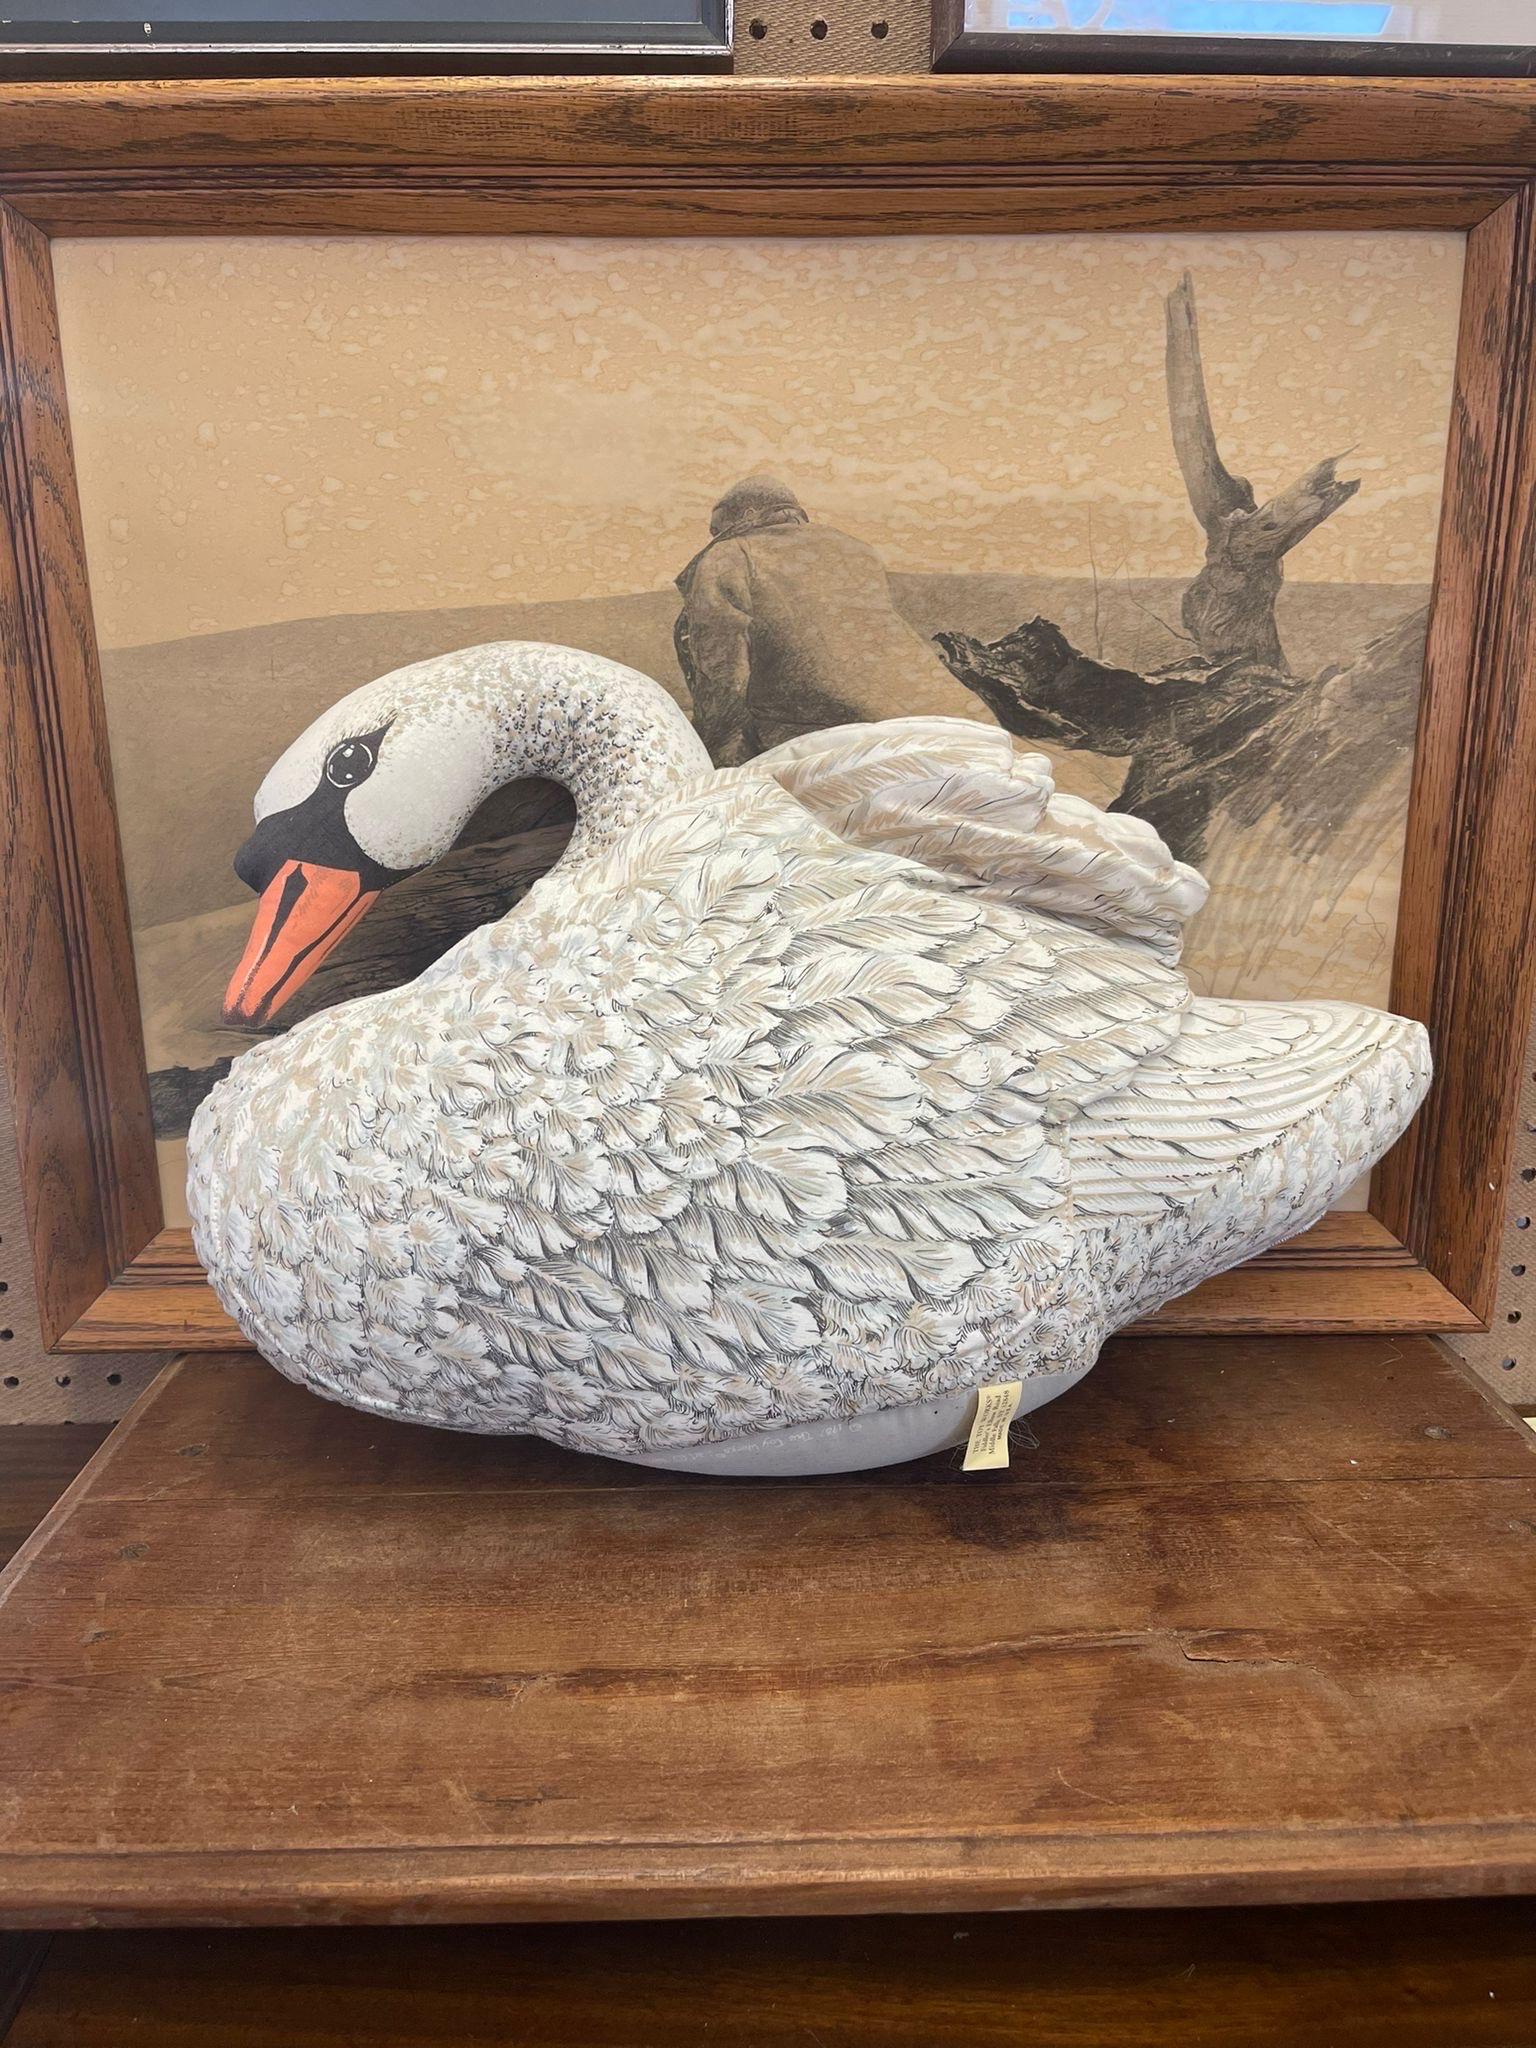 Vintage Pillow with Intricate Feather Design and Realistic Swan Imaging. Made by the Toys Works according to  the Tag. Vintage Condition Consistent with Age as Pictured.

Dimensions vv22 W ; 5 D ; 14 H